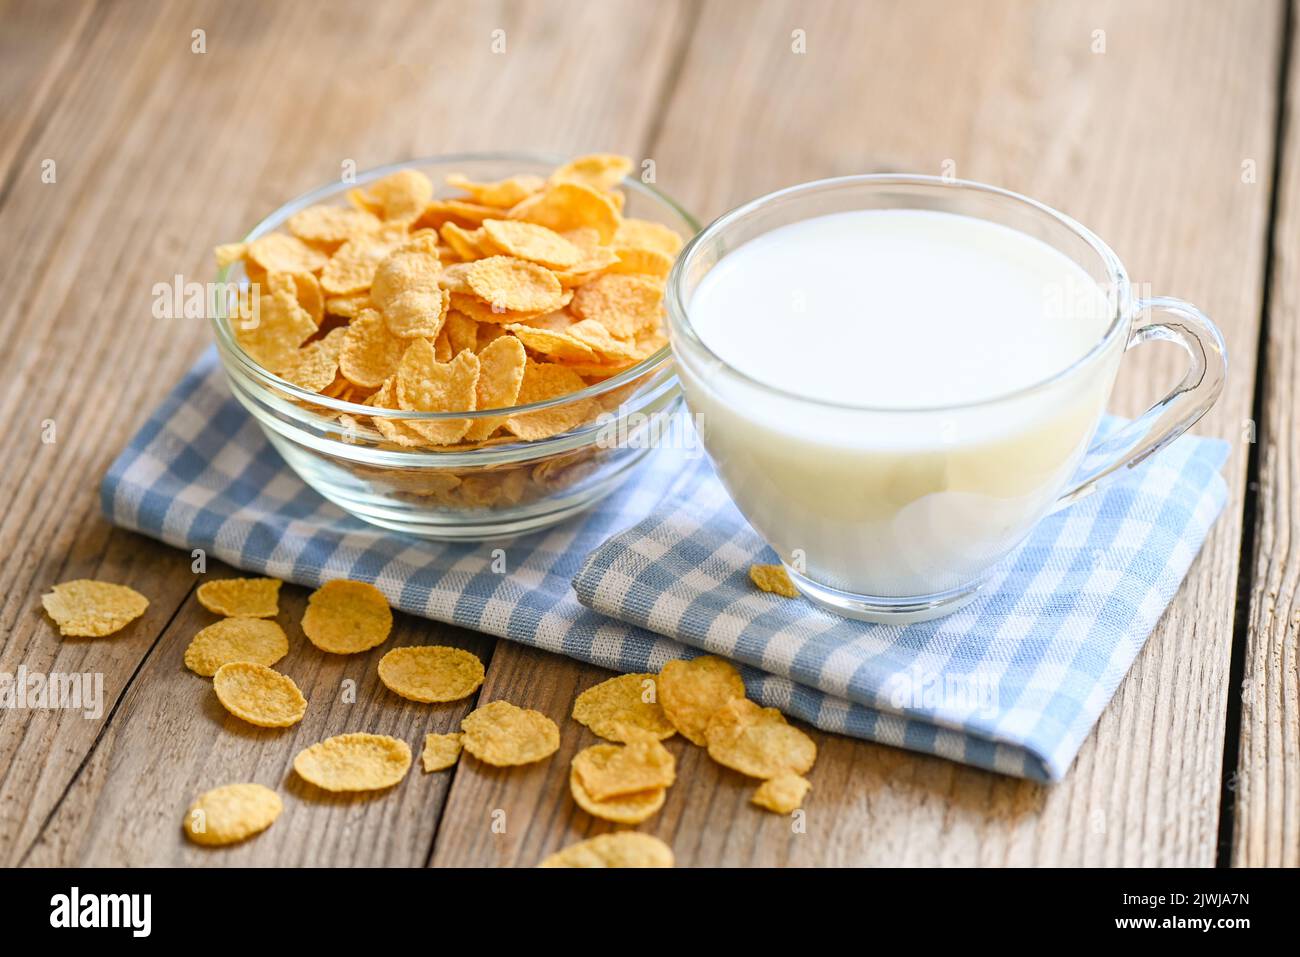 cornflakes bowl breakfast food and snack for healthy food concept, morning breakfast fresh whole grain cereal, cornflakes with milk on table food wood Stock Photo